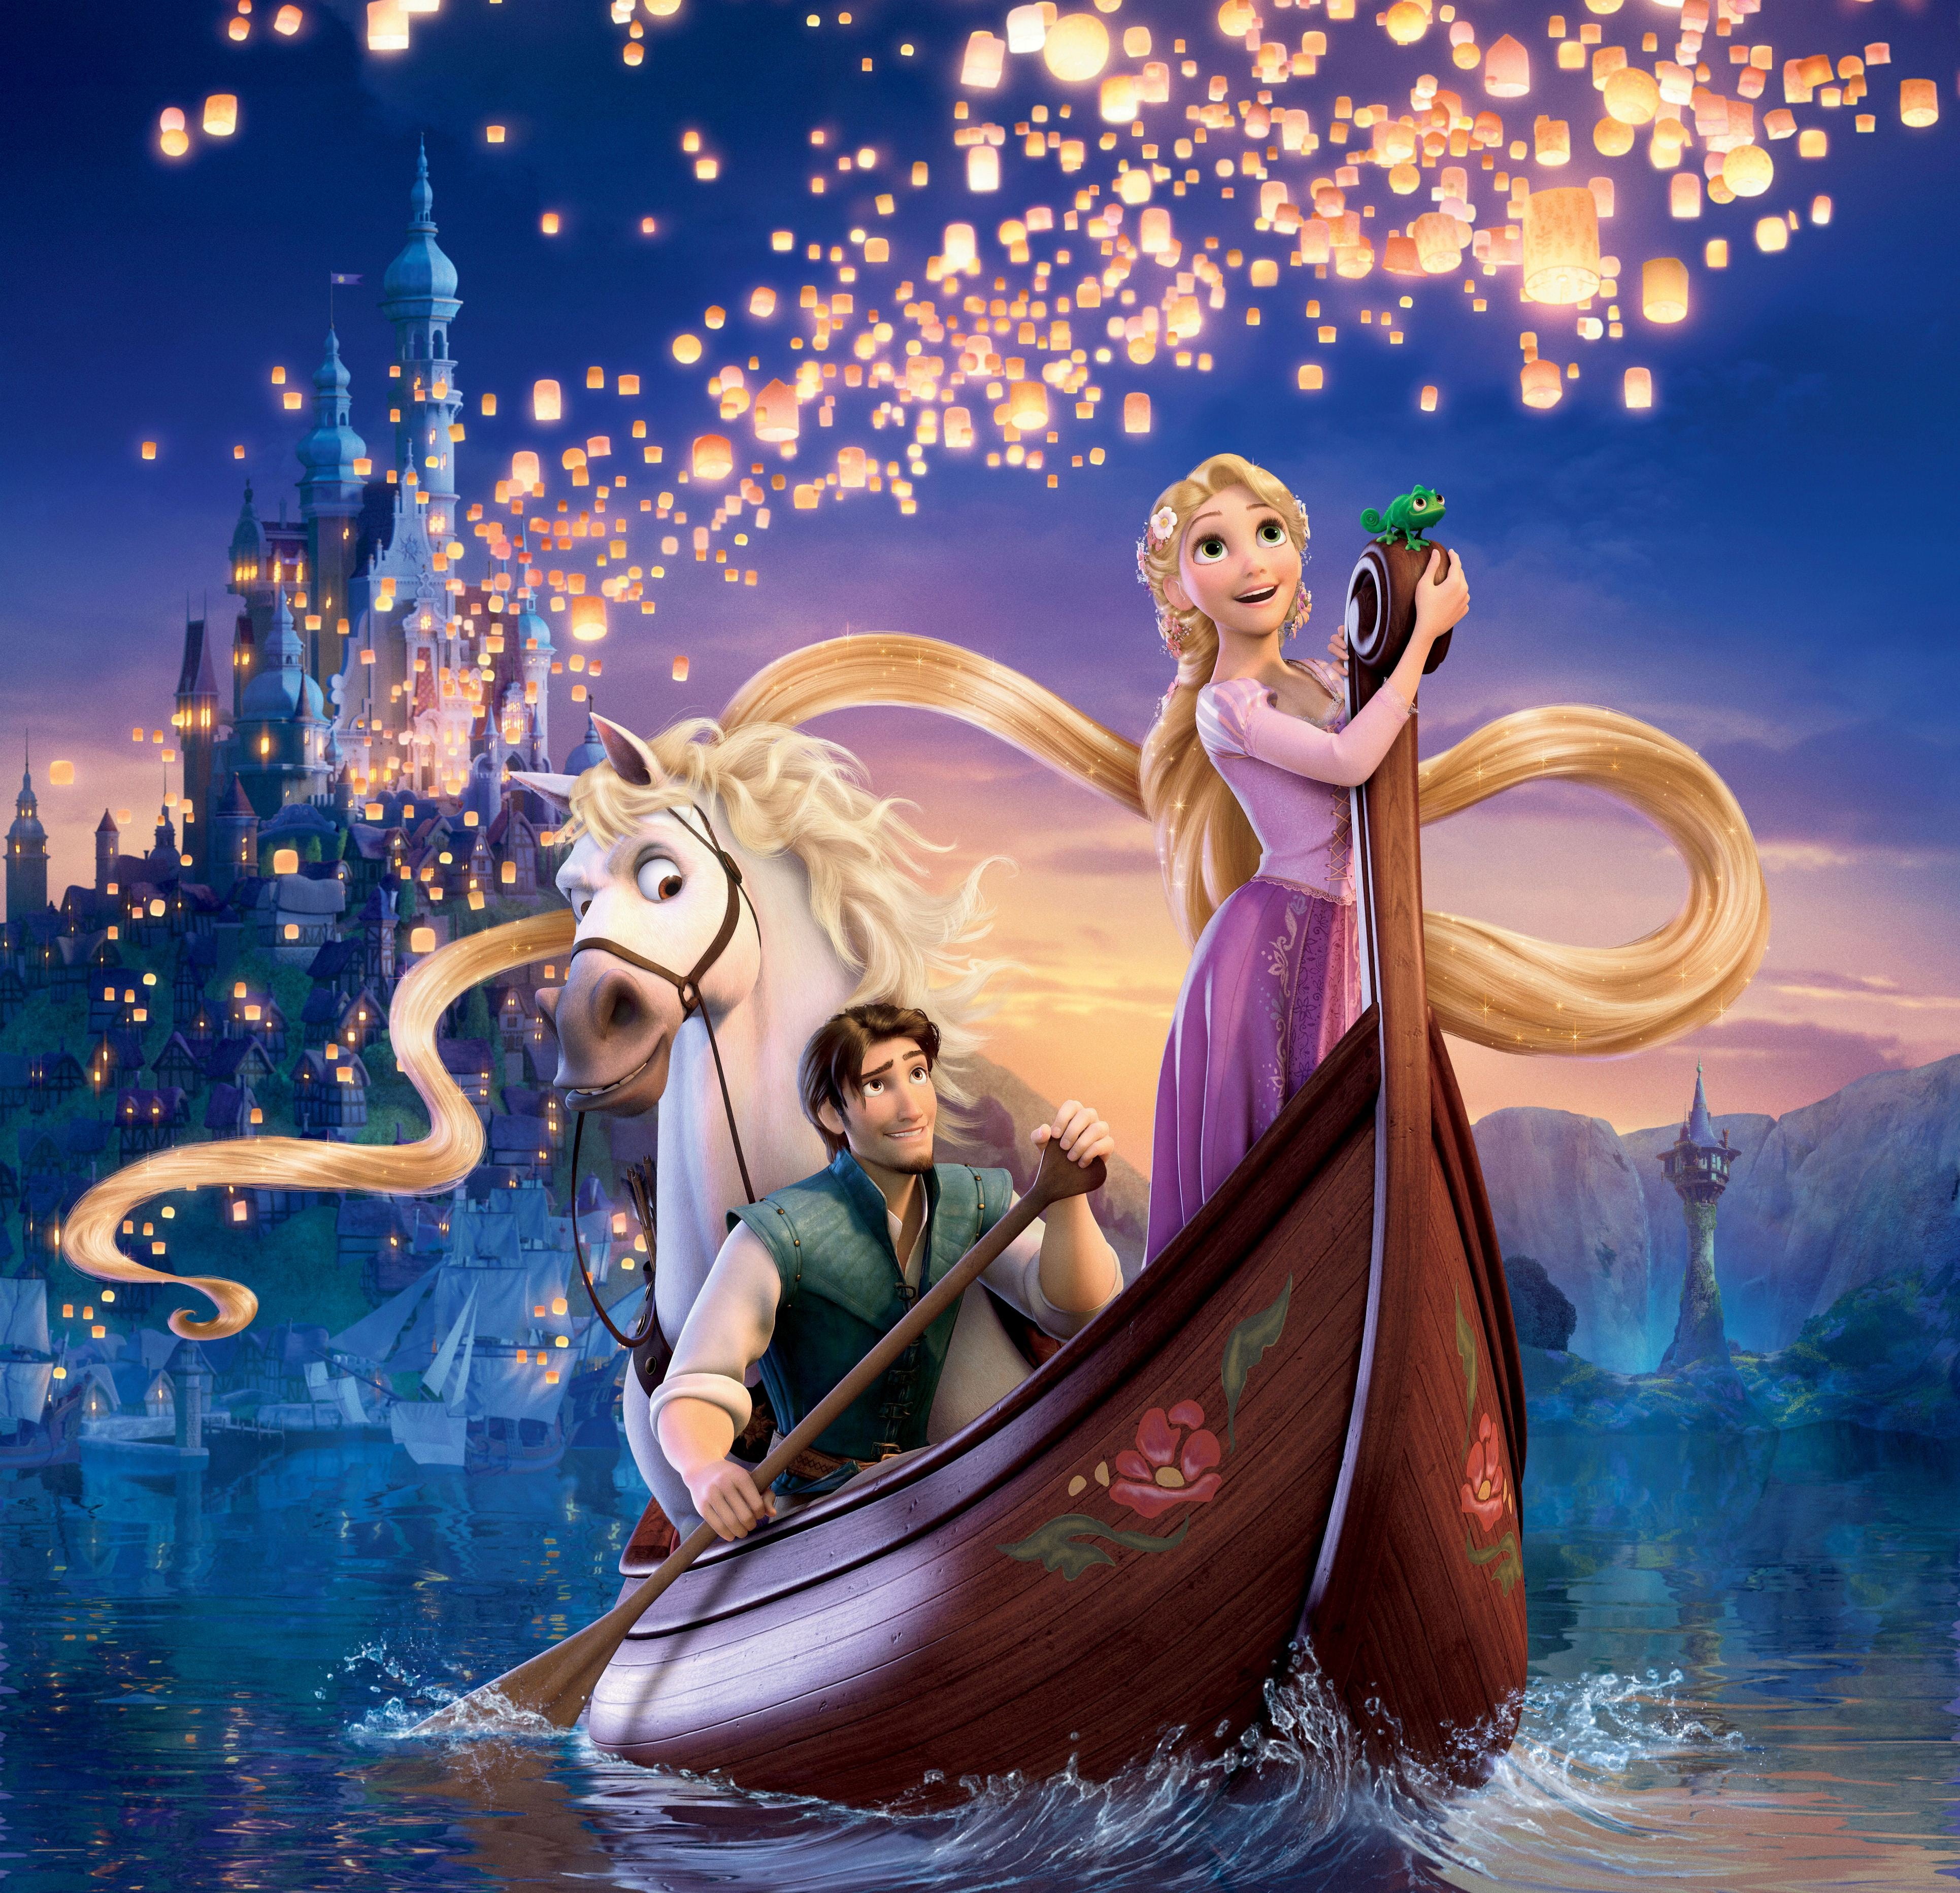 Disney Tangled wallpaper, wave, the sky, water, mountains, night